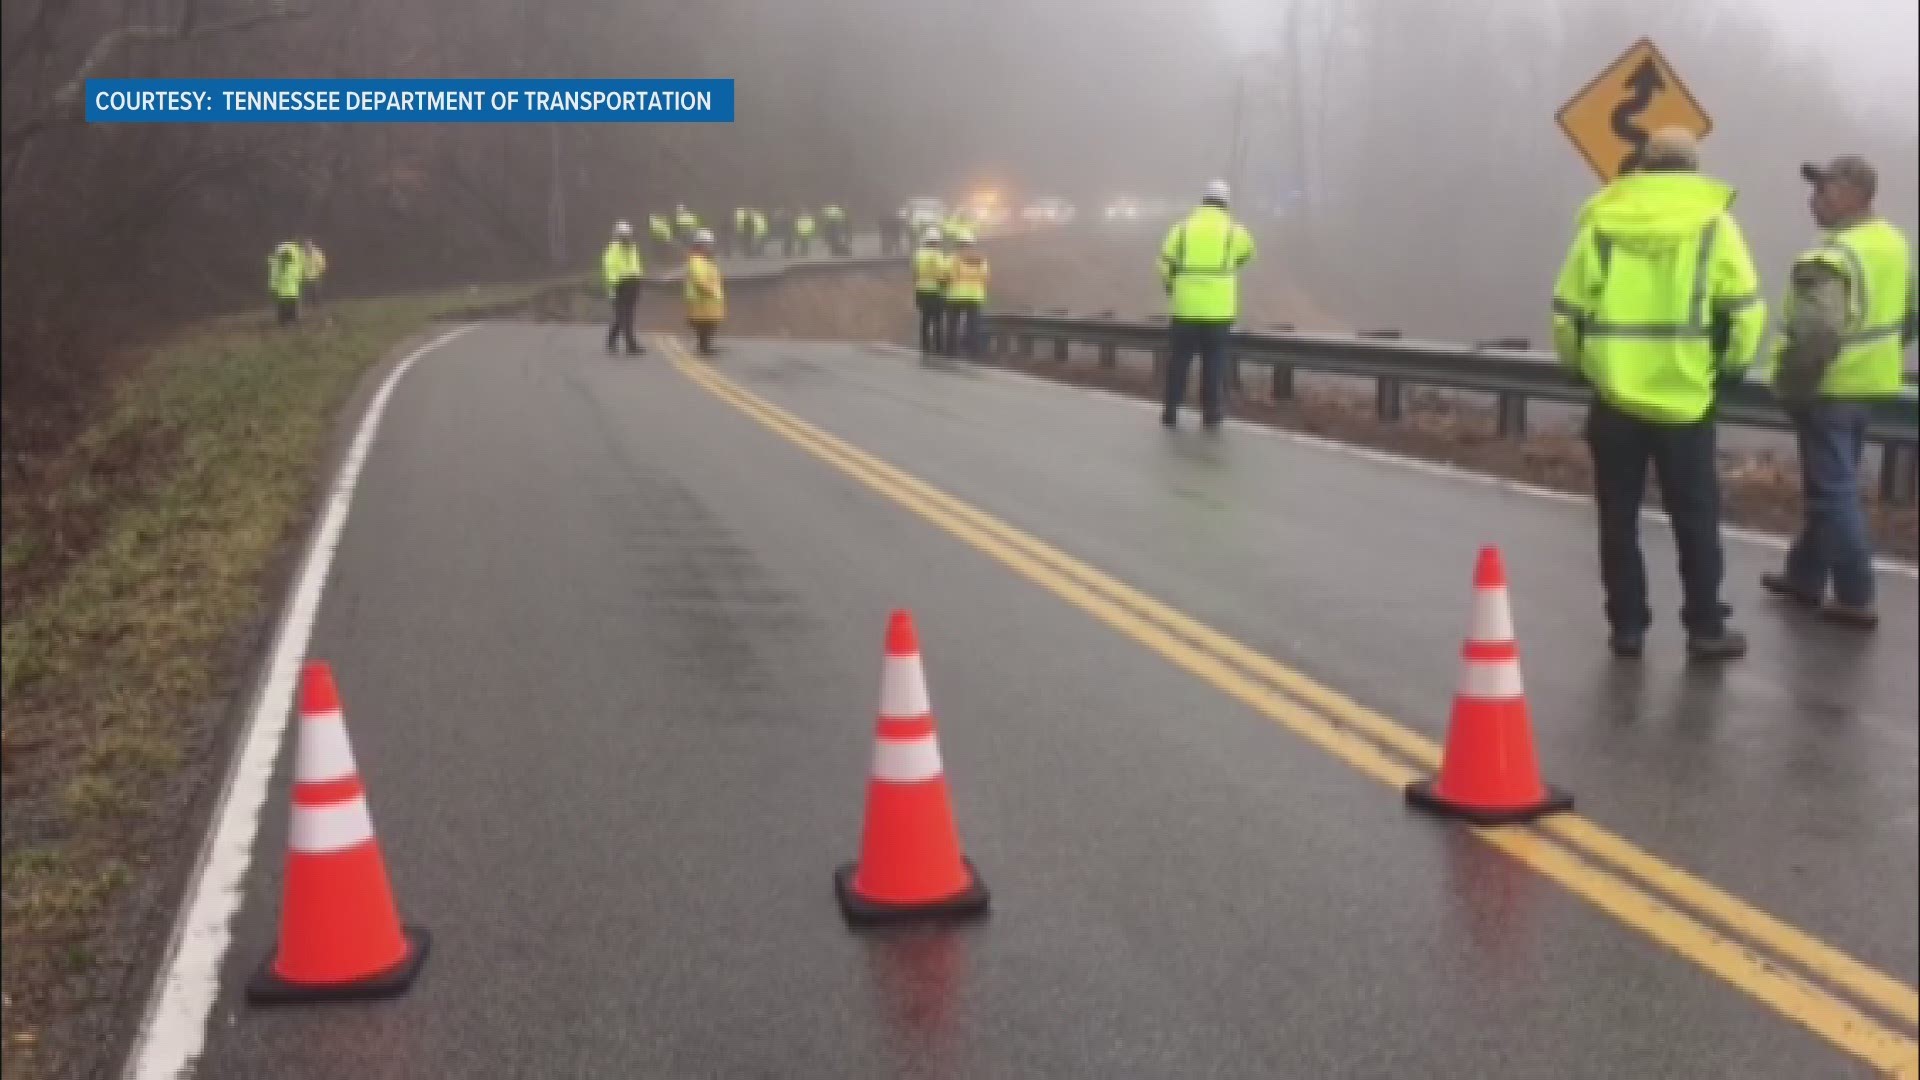 TDOT spokesman Marki Nagi shot this video of the scene which he describes as still unstable as of 10 a.m. Thursday morning. He said it will be a long-term road closure as crews assess the slope.